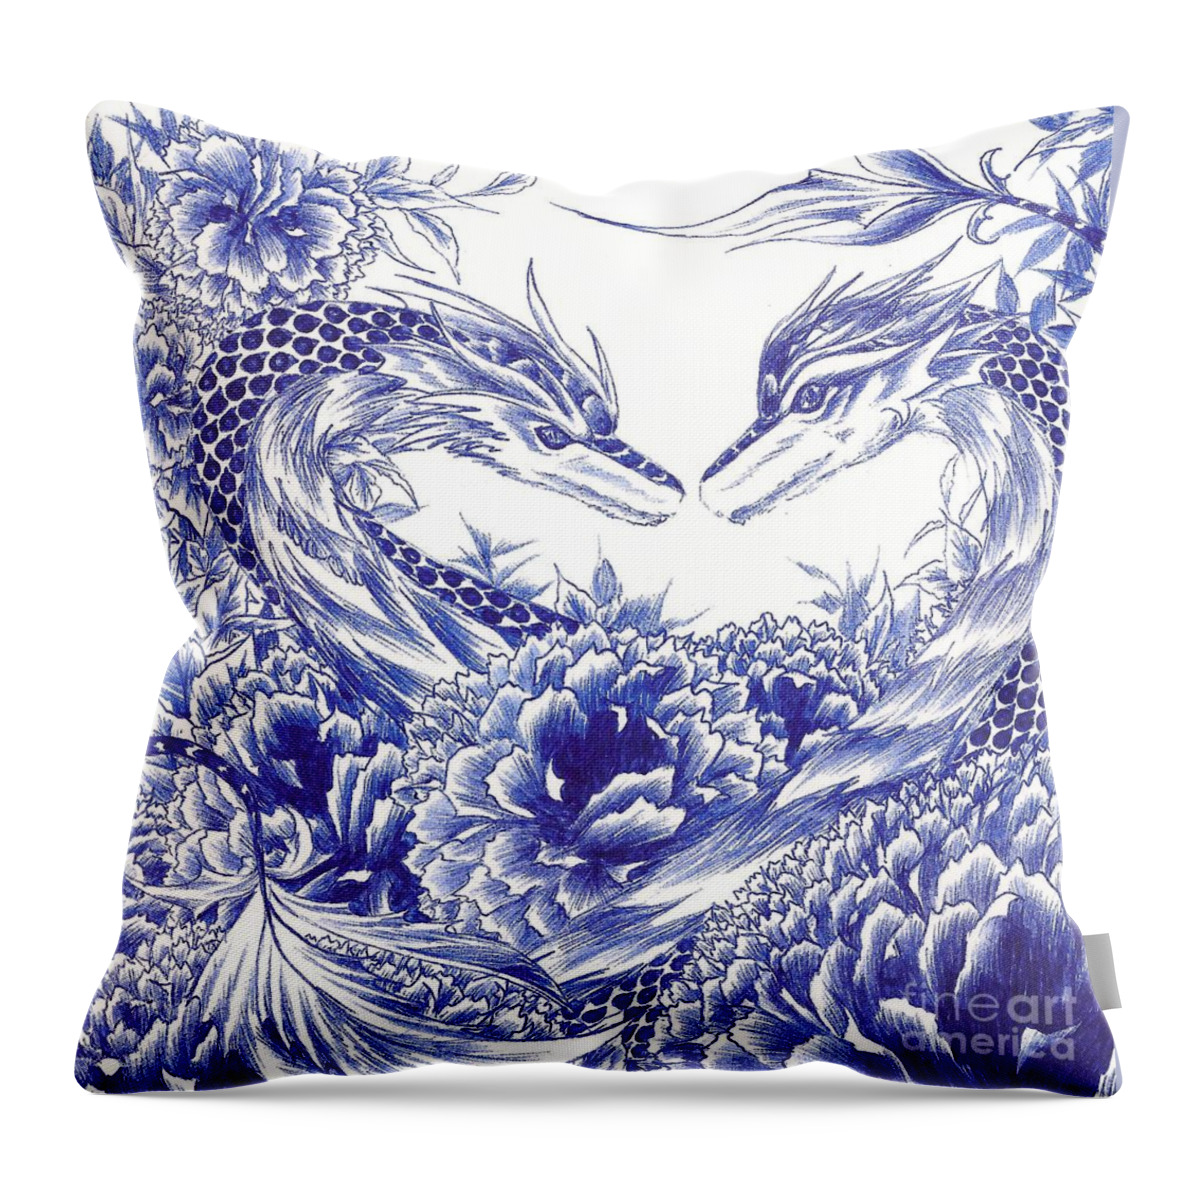 Dragon Throw Pillow featuring the drawing When Our Eyes Meet by Alice Chen